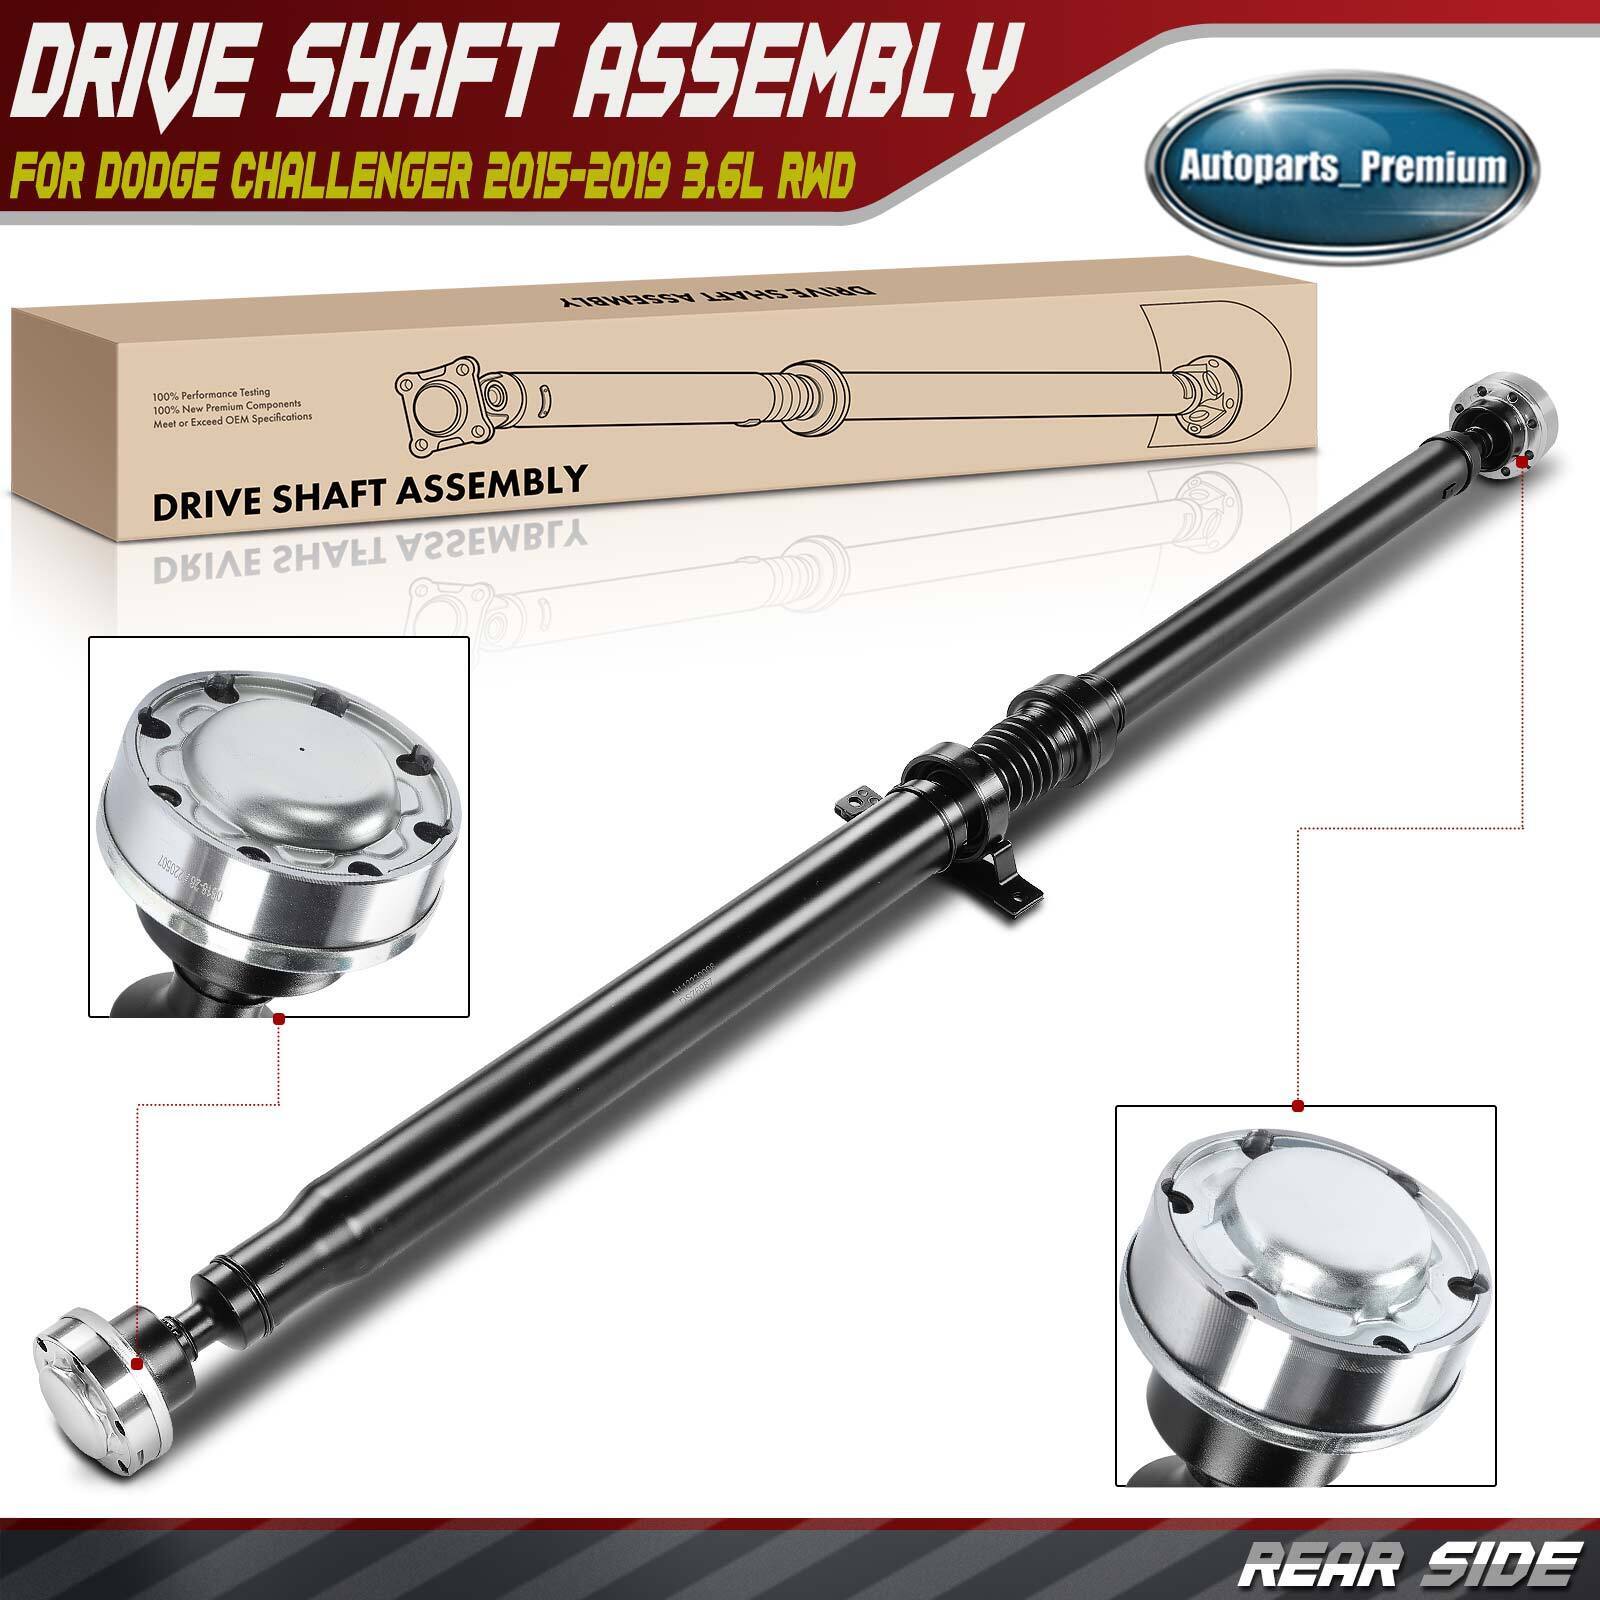 Auto Rear Driveshaft Prop Shaft Assembly for Dodge Challenger 2015-2019 3.6L RWD